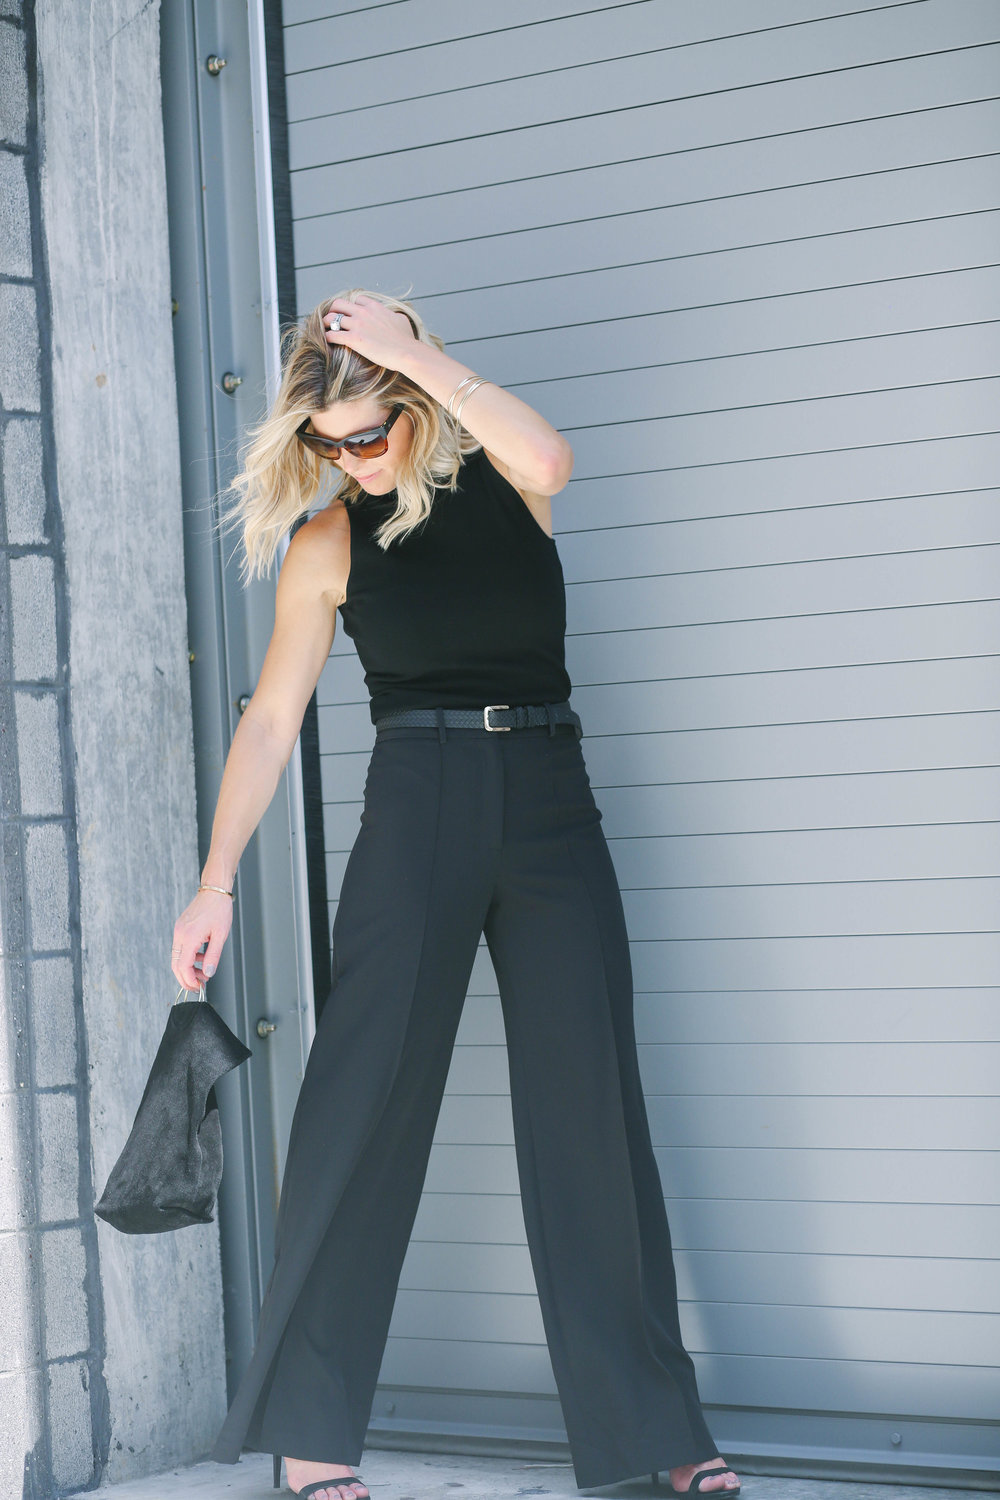 WIDE-LEG PANT LOVER… RIGHT HERE | Living With Landyn